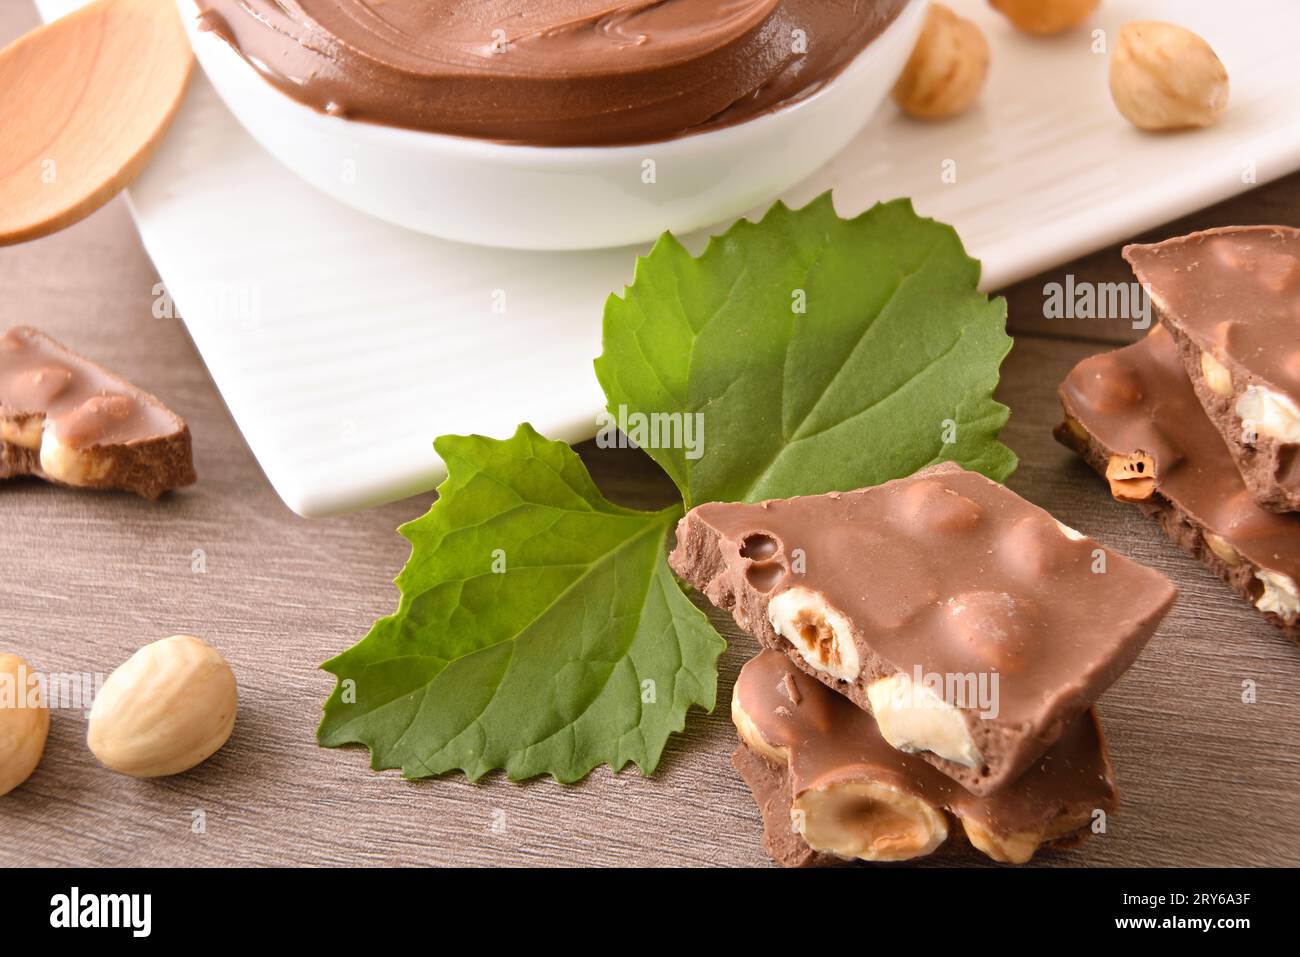 Detail of stack of milk chocolate and hazelnut portions on wooden table with leaves and bowl with praline cream. Elevated view. Stock Photo